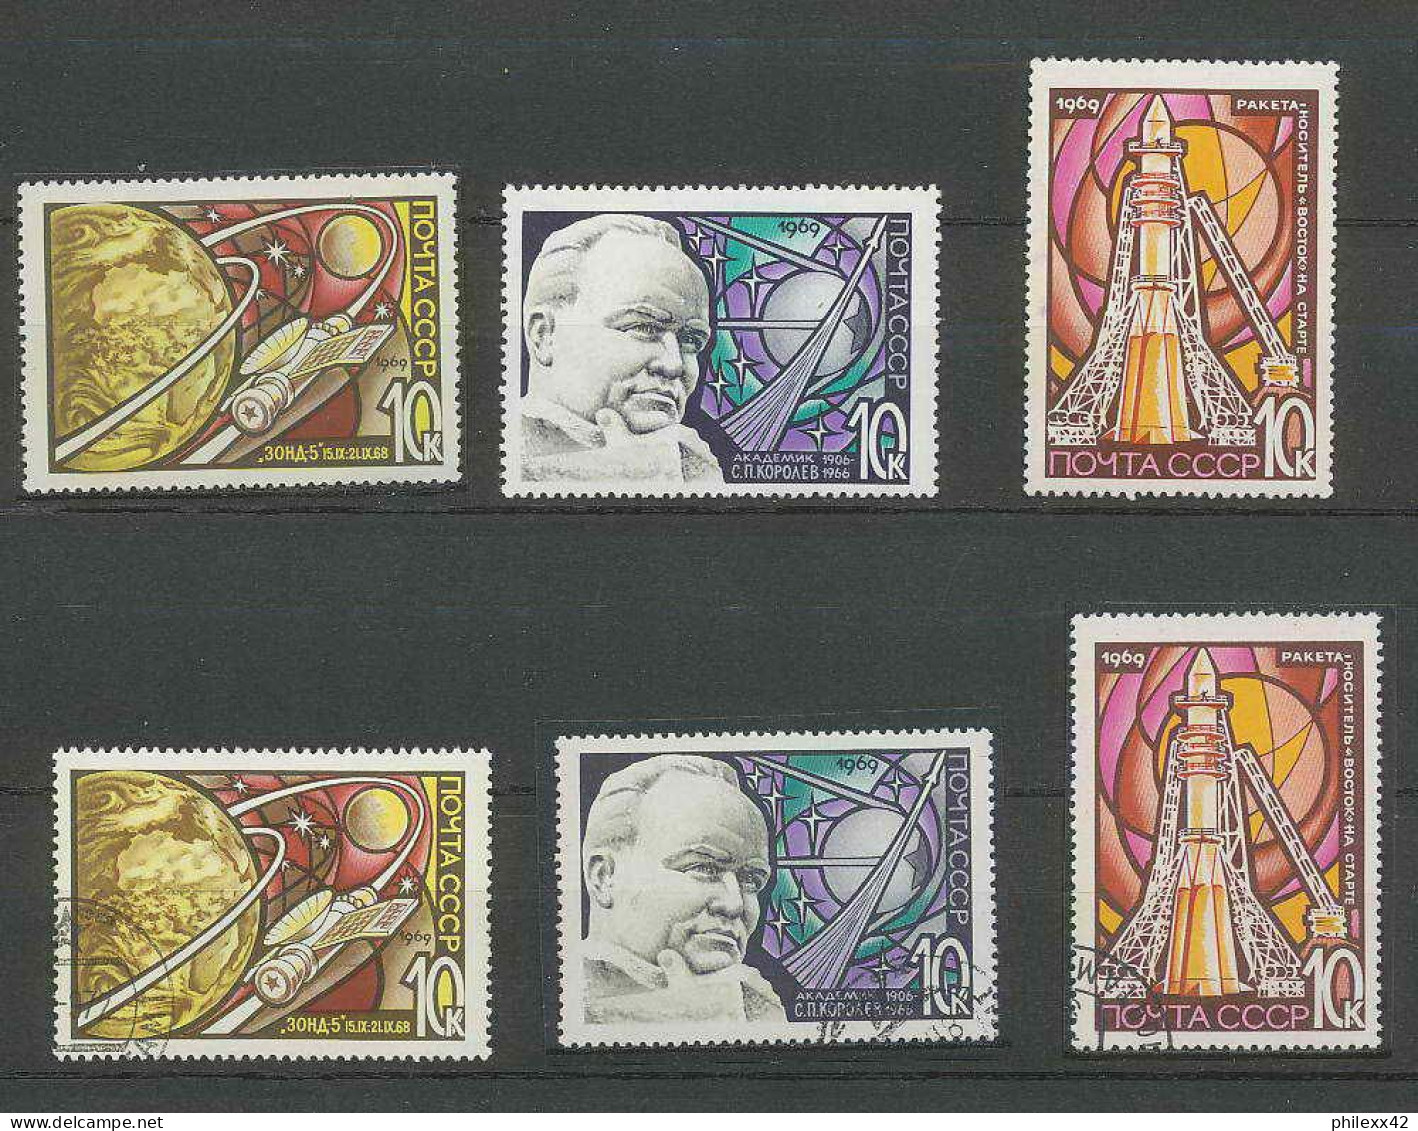 1394/ Espace (space) Neuf ** MNH Russie (Russia Urss USSR) 3478/3480 + USED - Russia & URSS